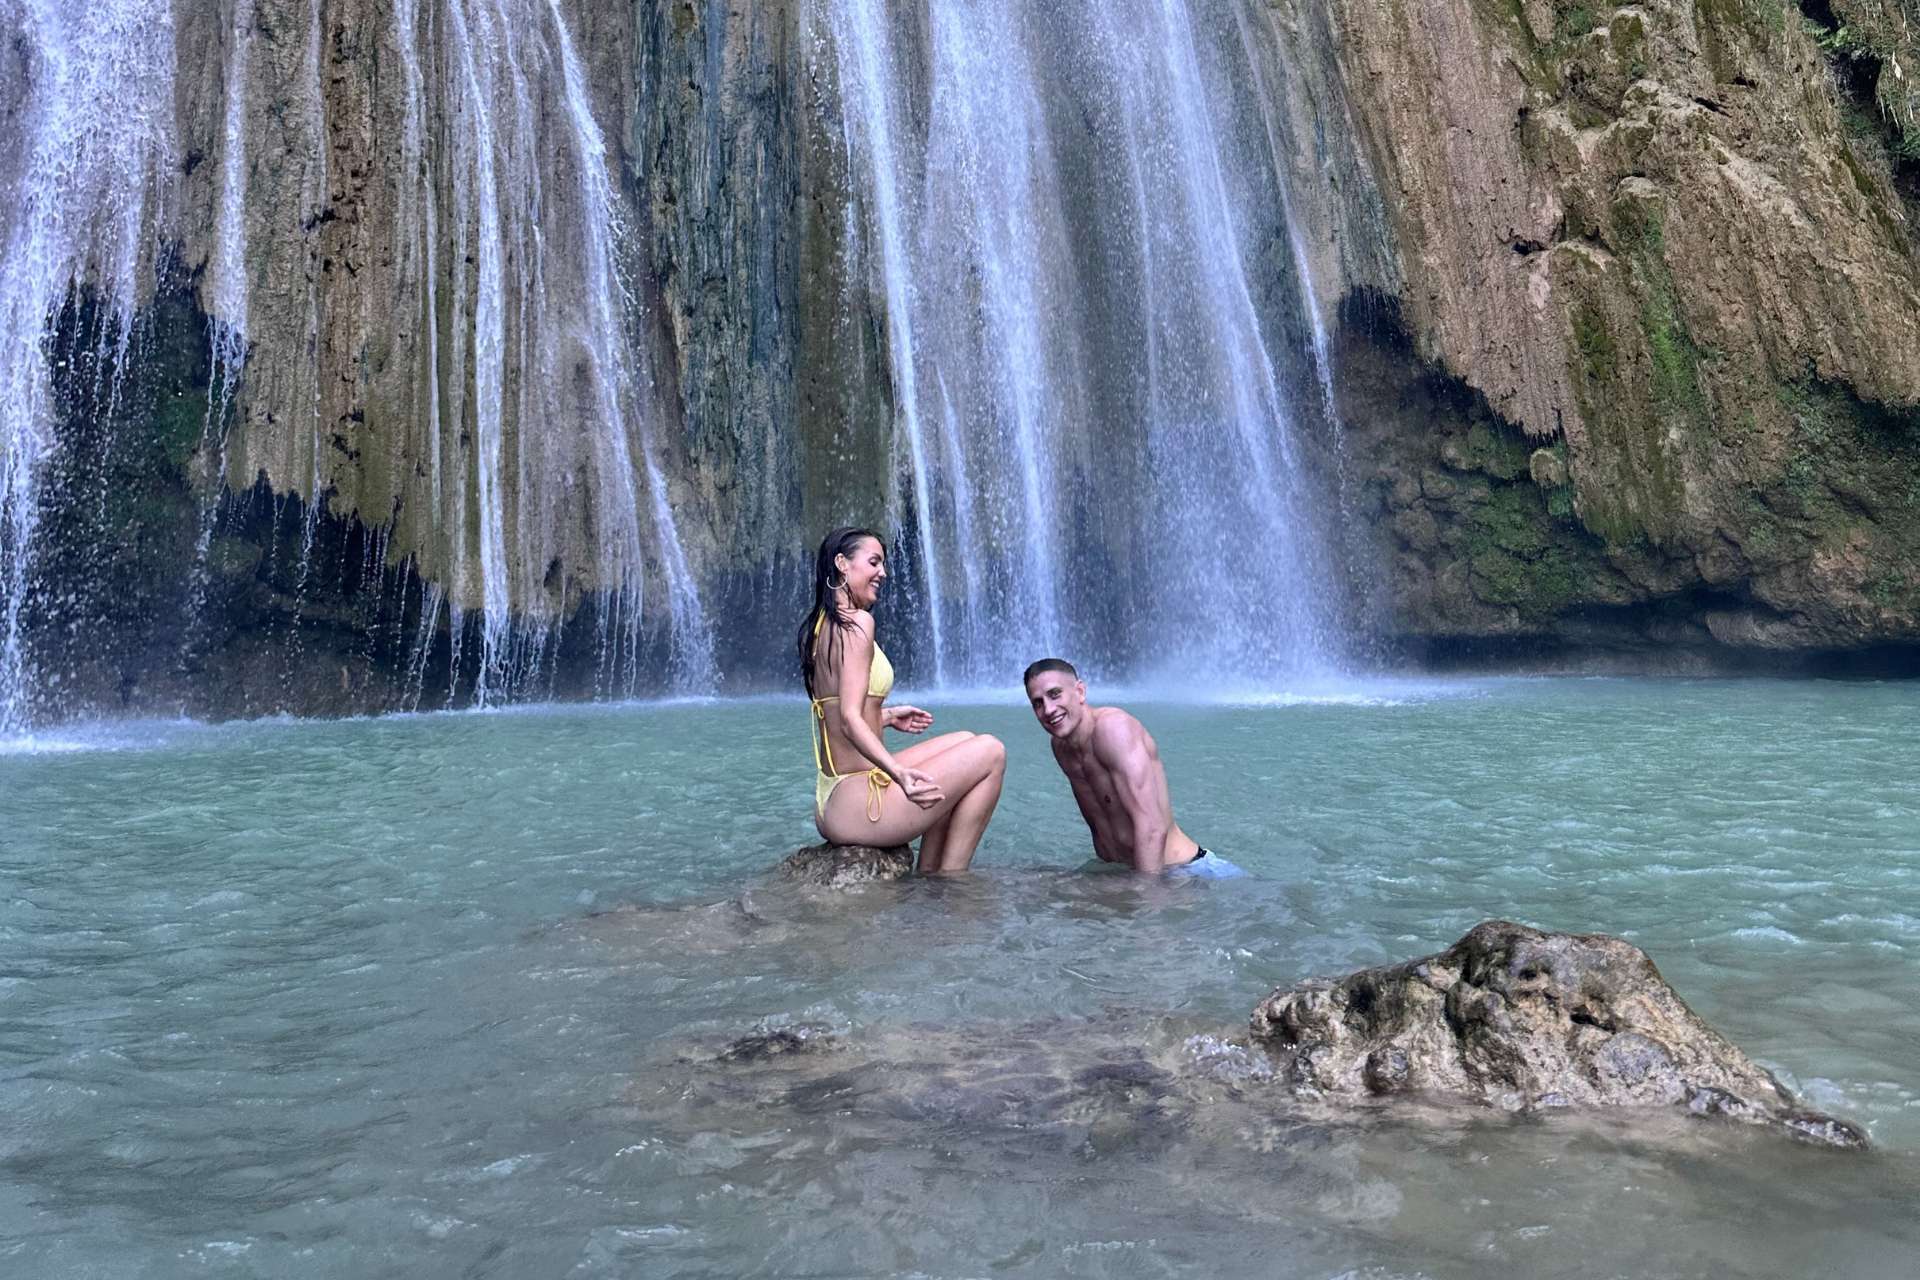 Marte and GK in the water of a waterfall in Dominican Republic